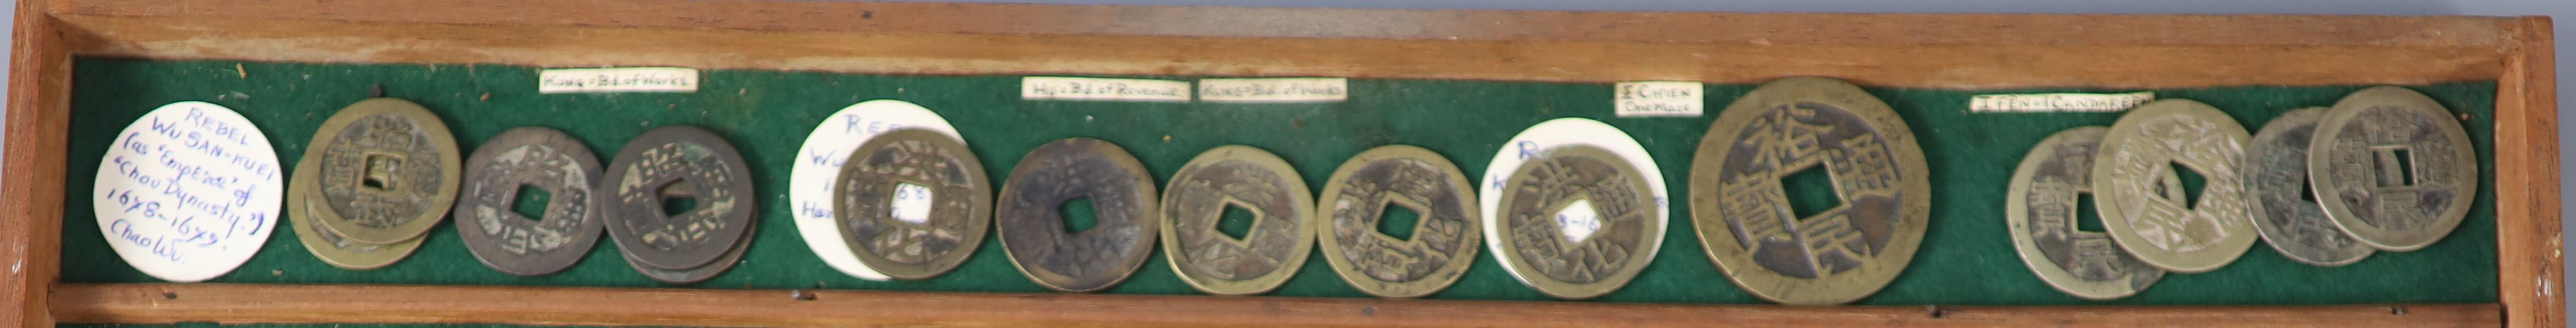 China, 115 bronze round coins, late Ming dynasty and post Ming rebels, (1620-1678)